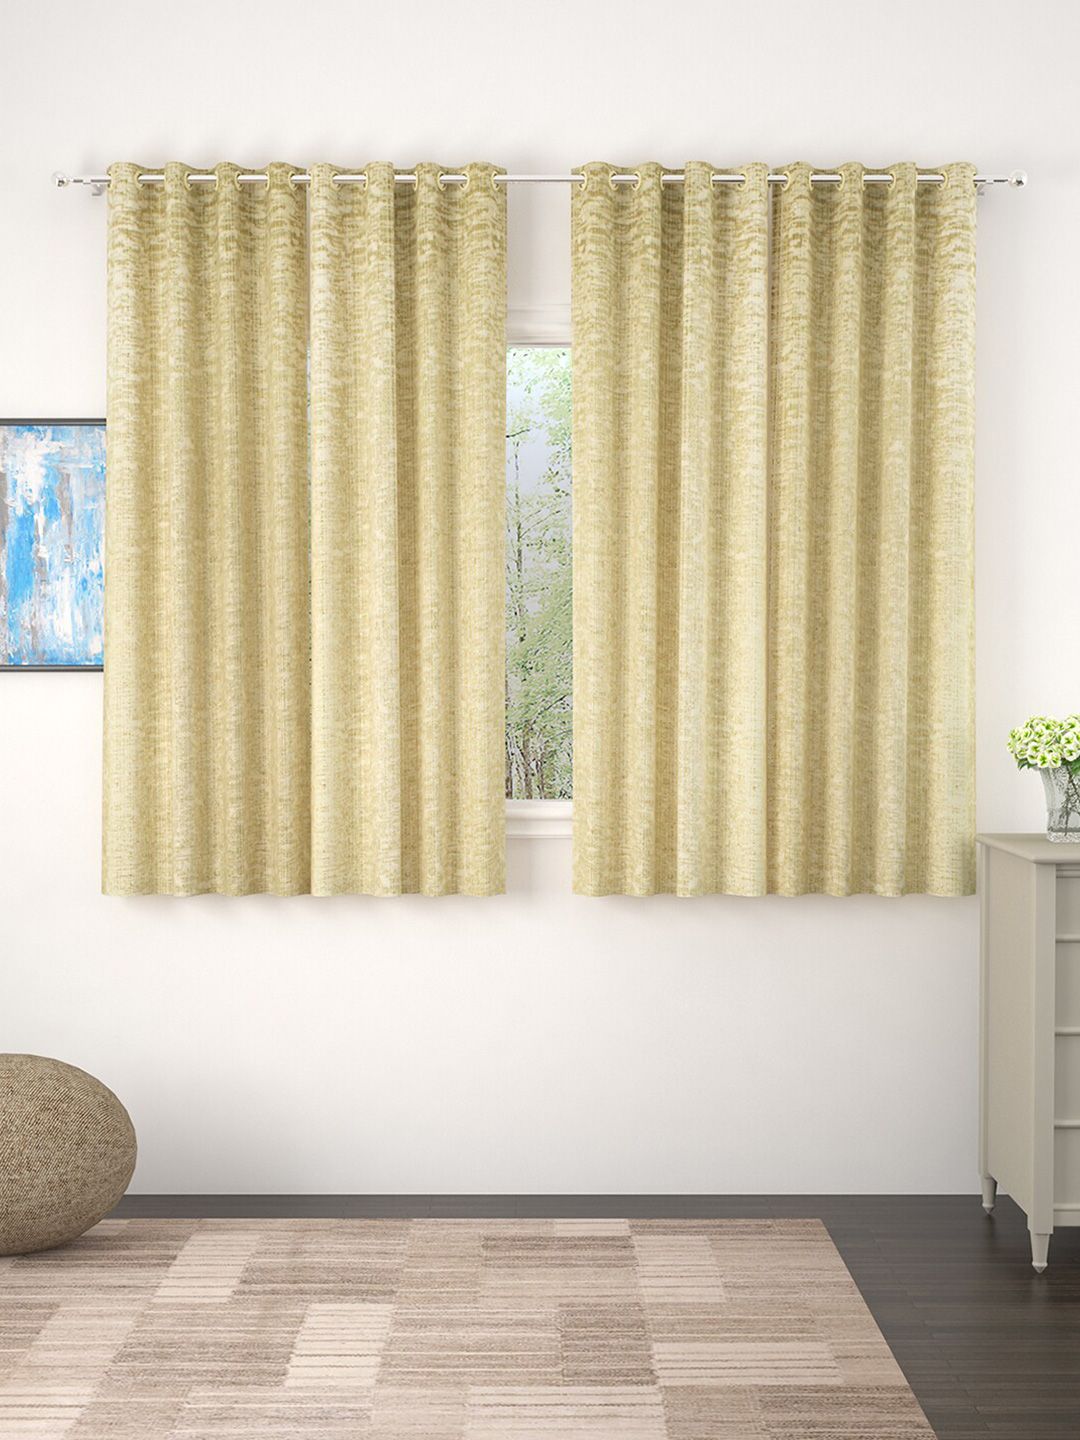 Story@home Beige Set of 4 Window Curtain Price in India